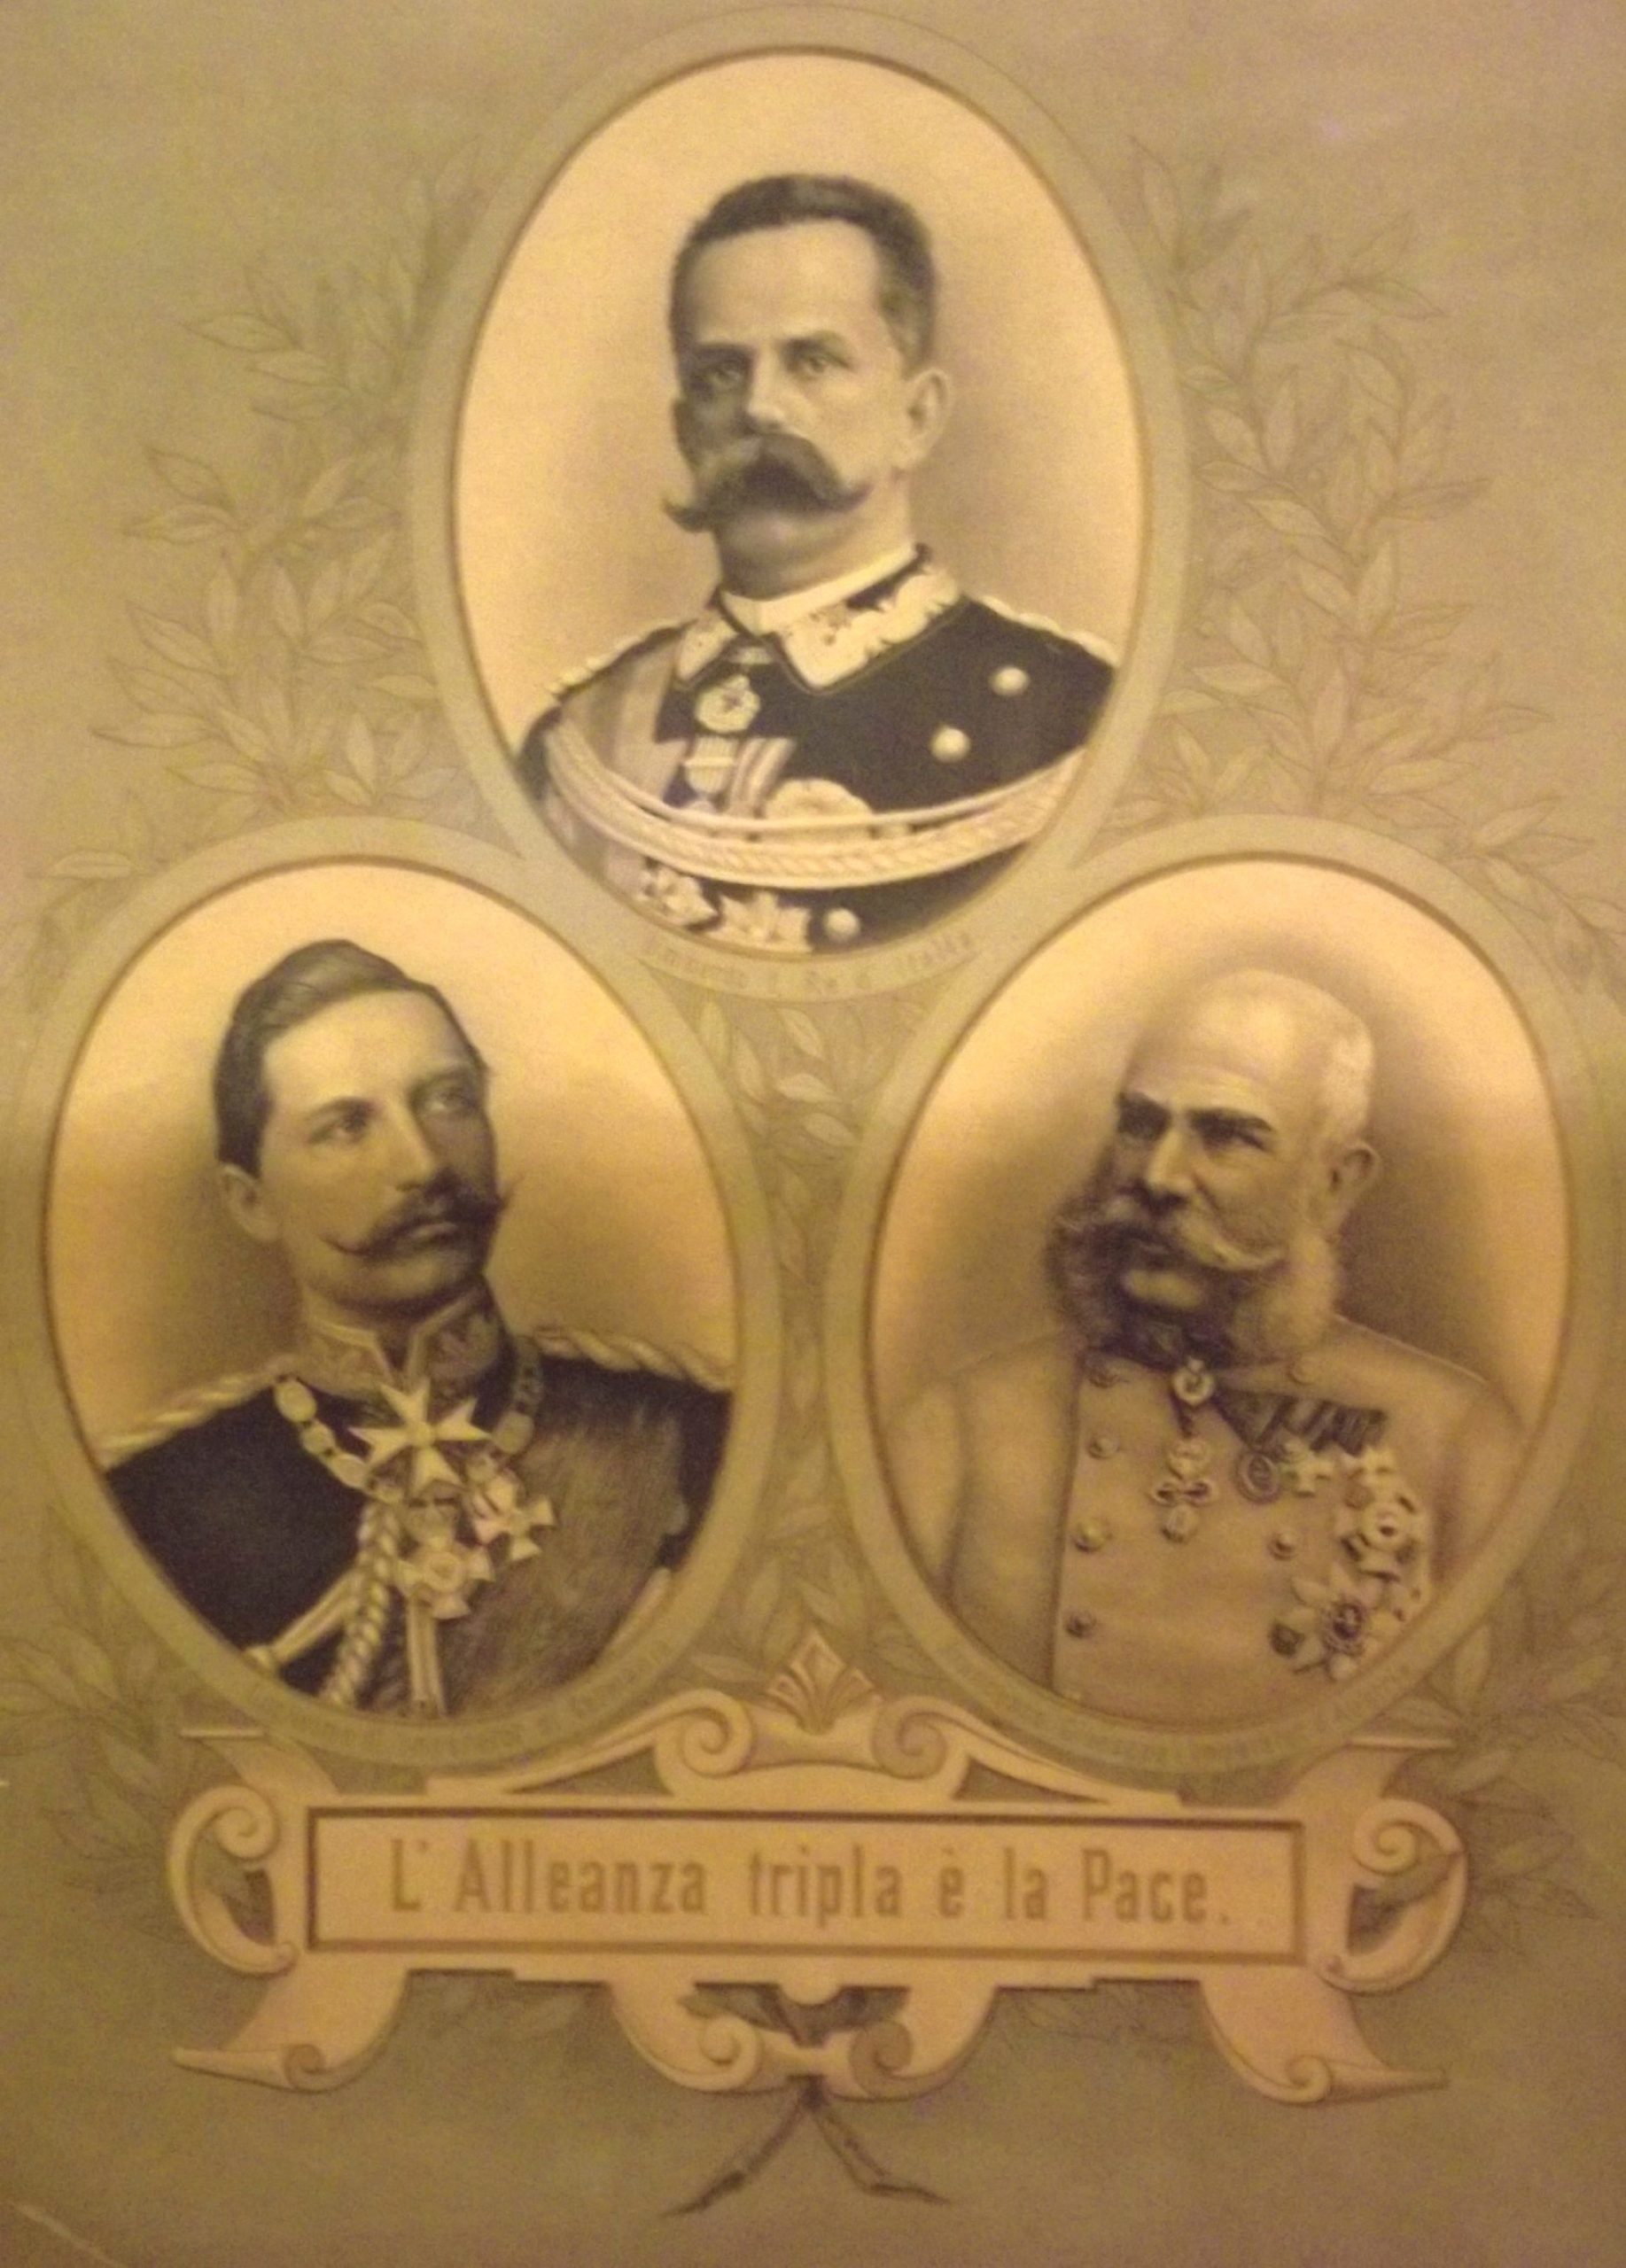 The Triple Alliance: The 1882 Agreement That Caused WW1 - History